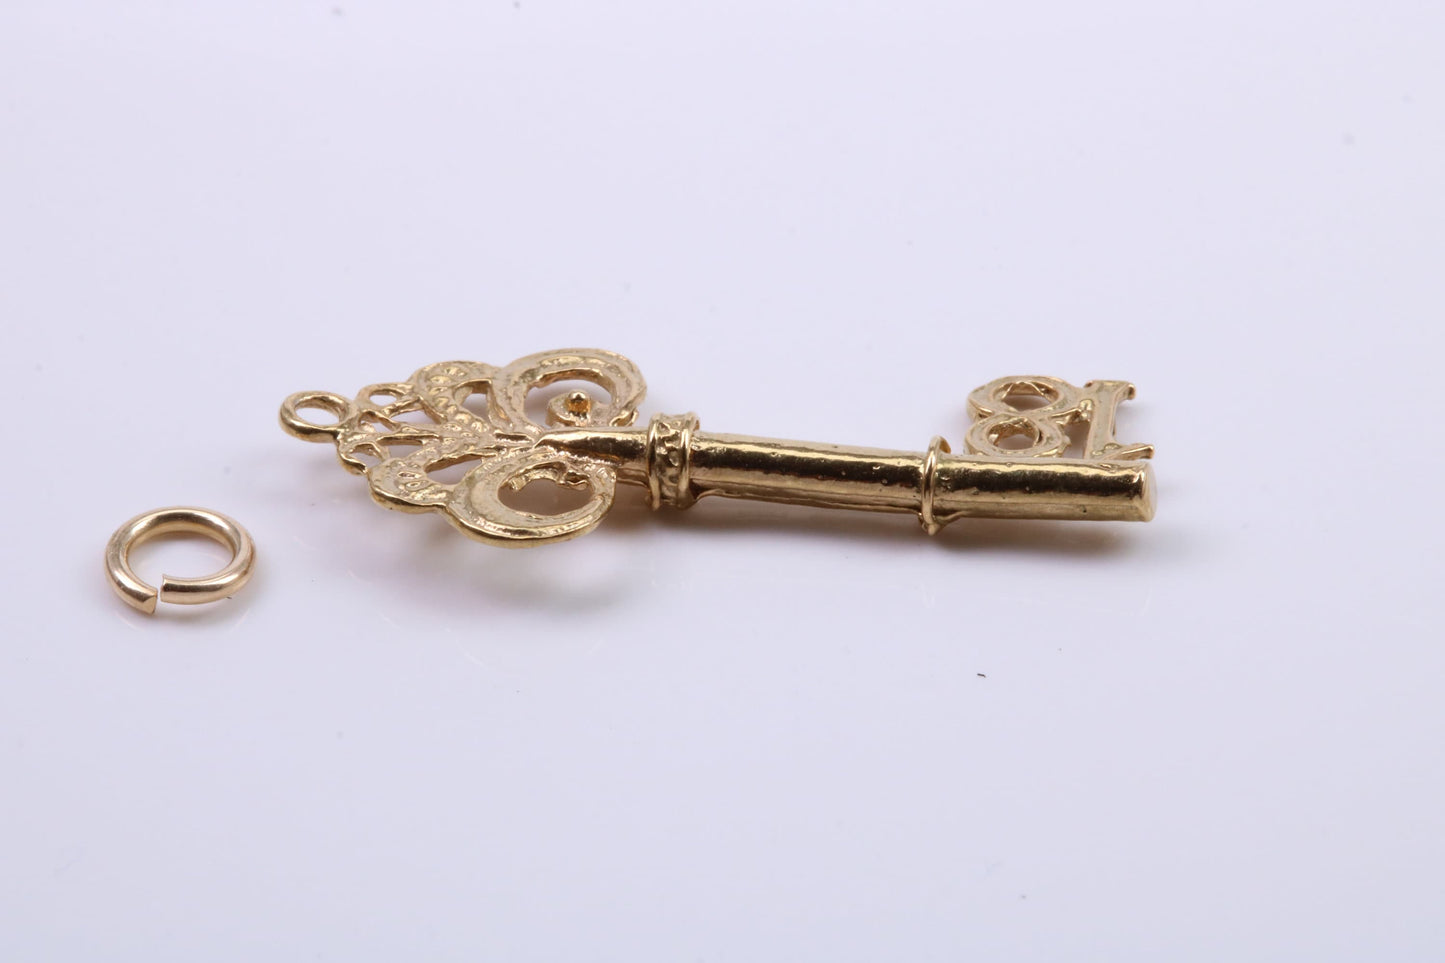 18th Birthday Key Charm, Traditional Charm, Made from Solid Yellow Gold, British Hallmarked, Complete with Attachment Link